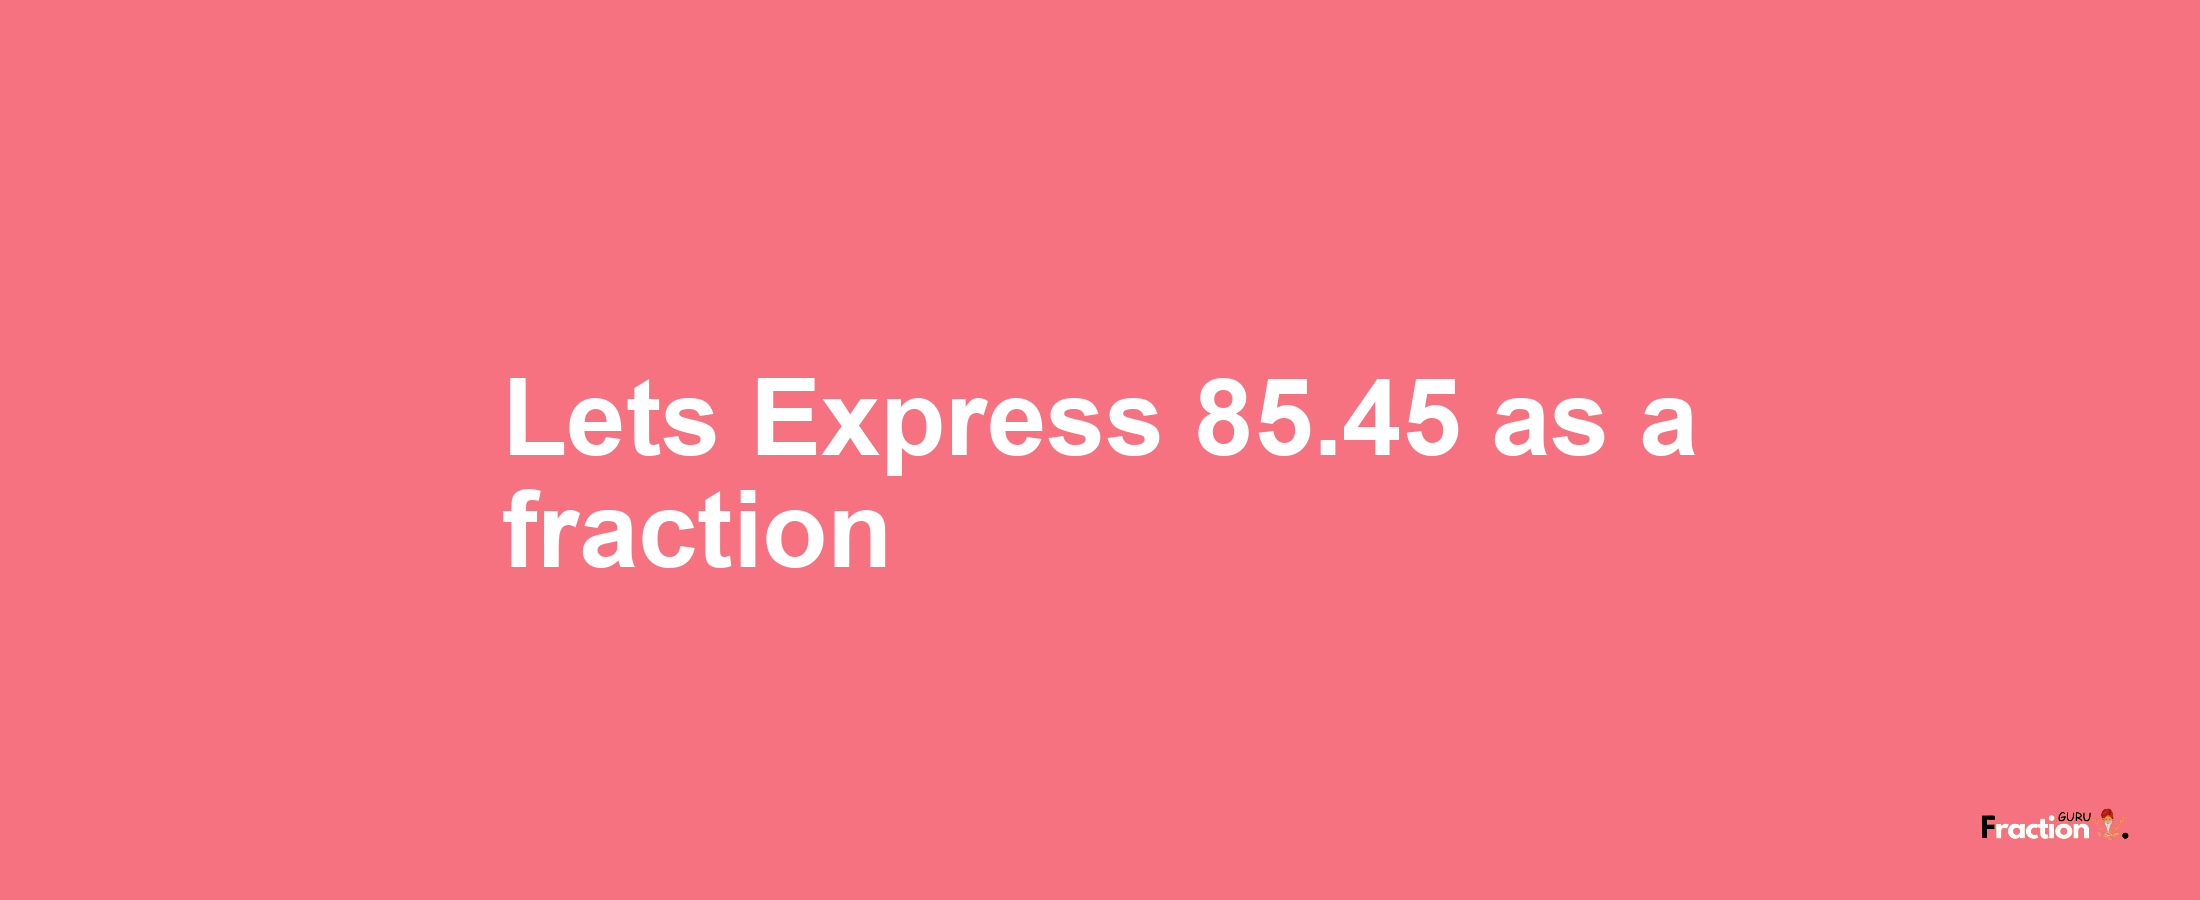 Lets Express 85.45 as afraction